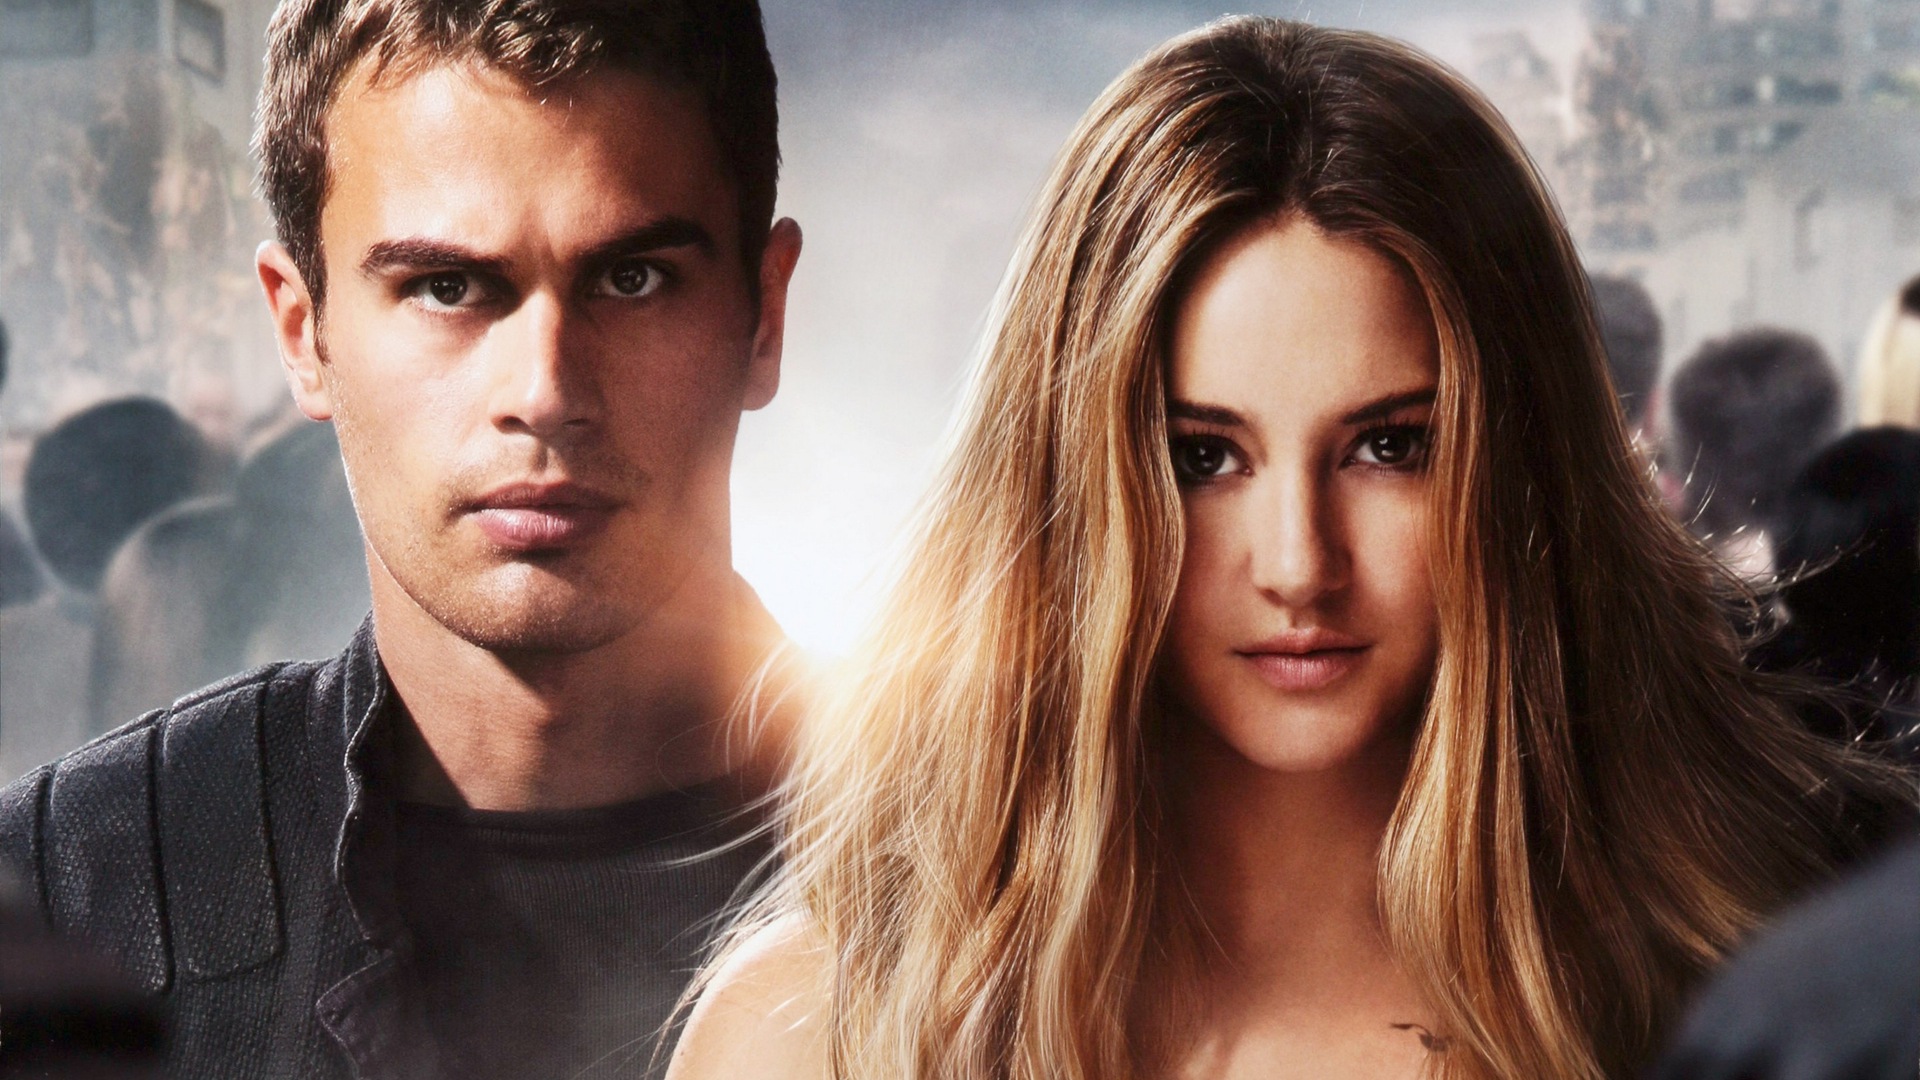 Divergent movie HD wallpapers #2 - 1920x1080